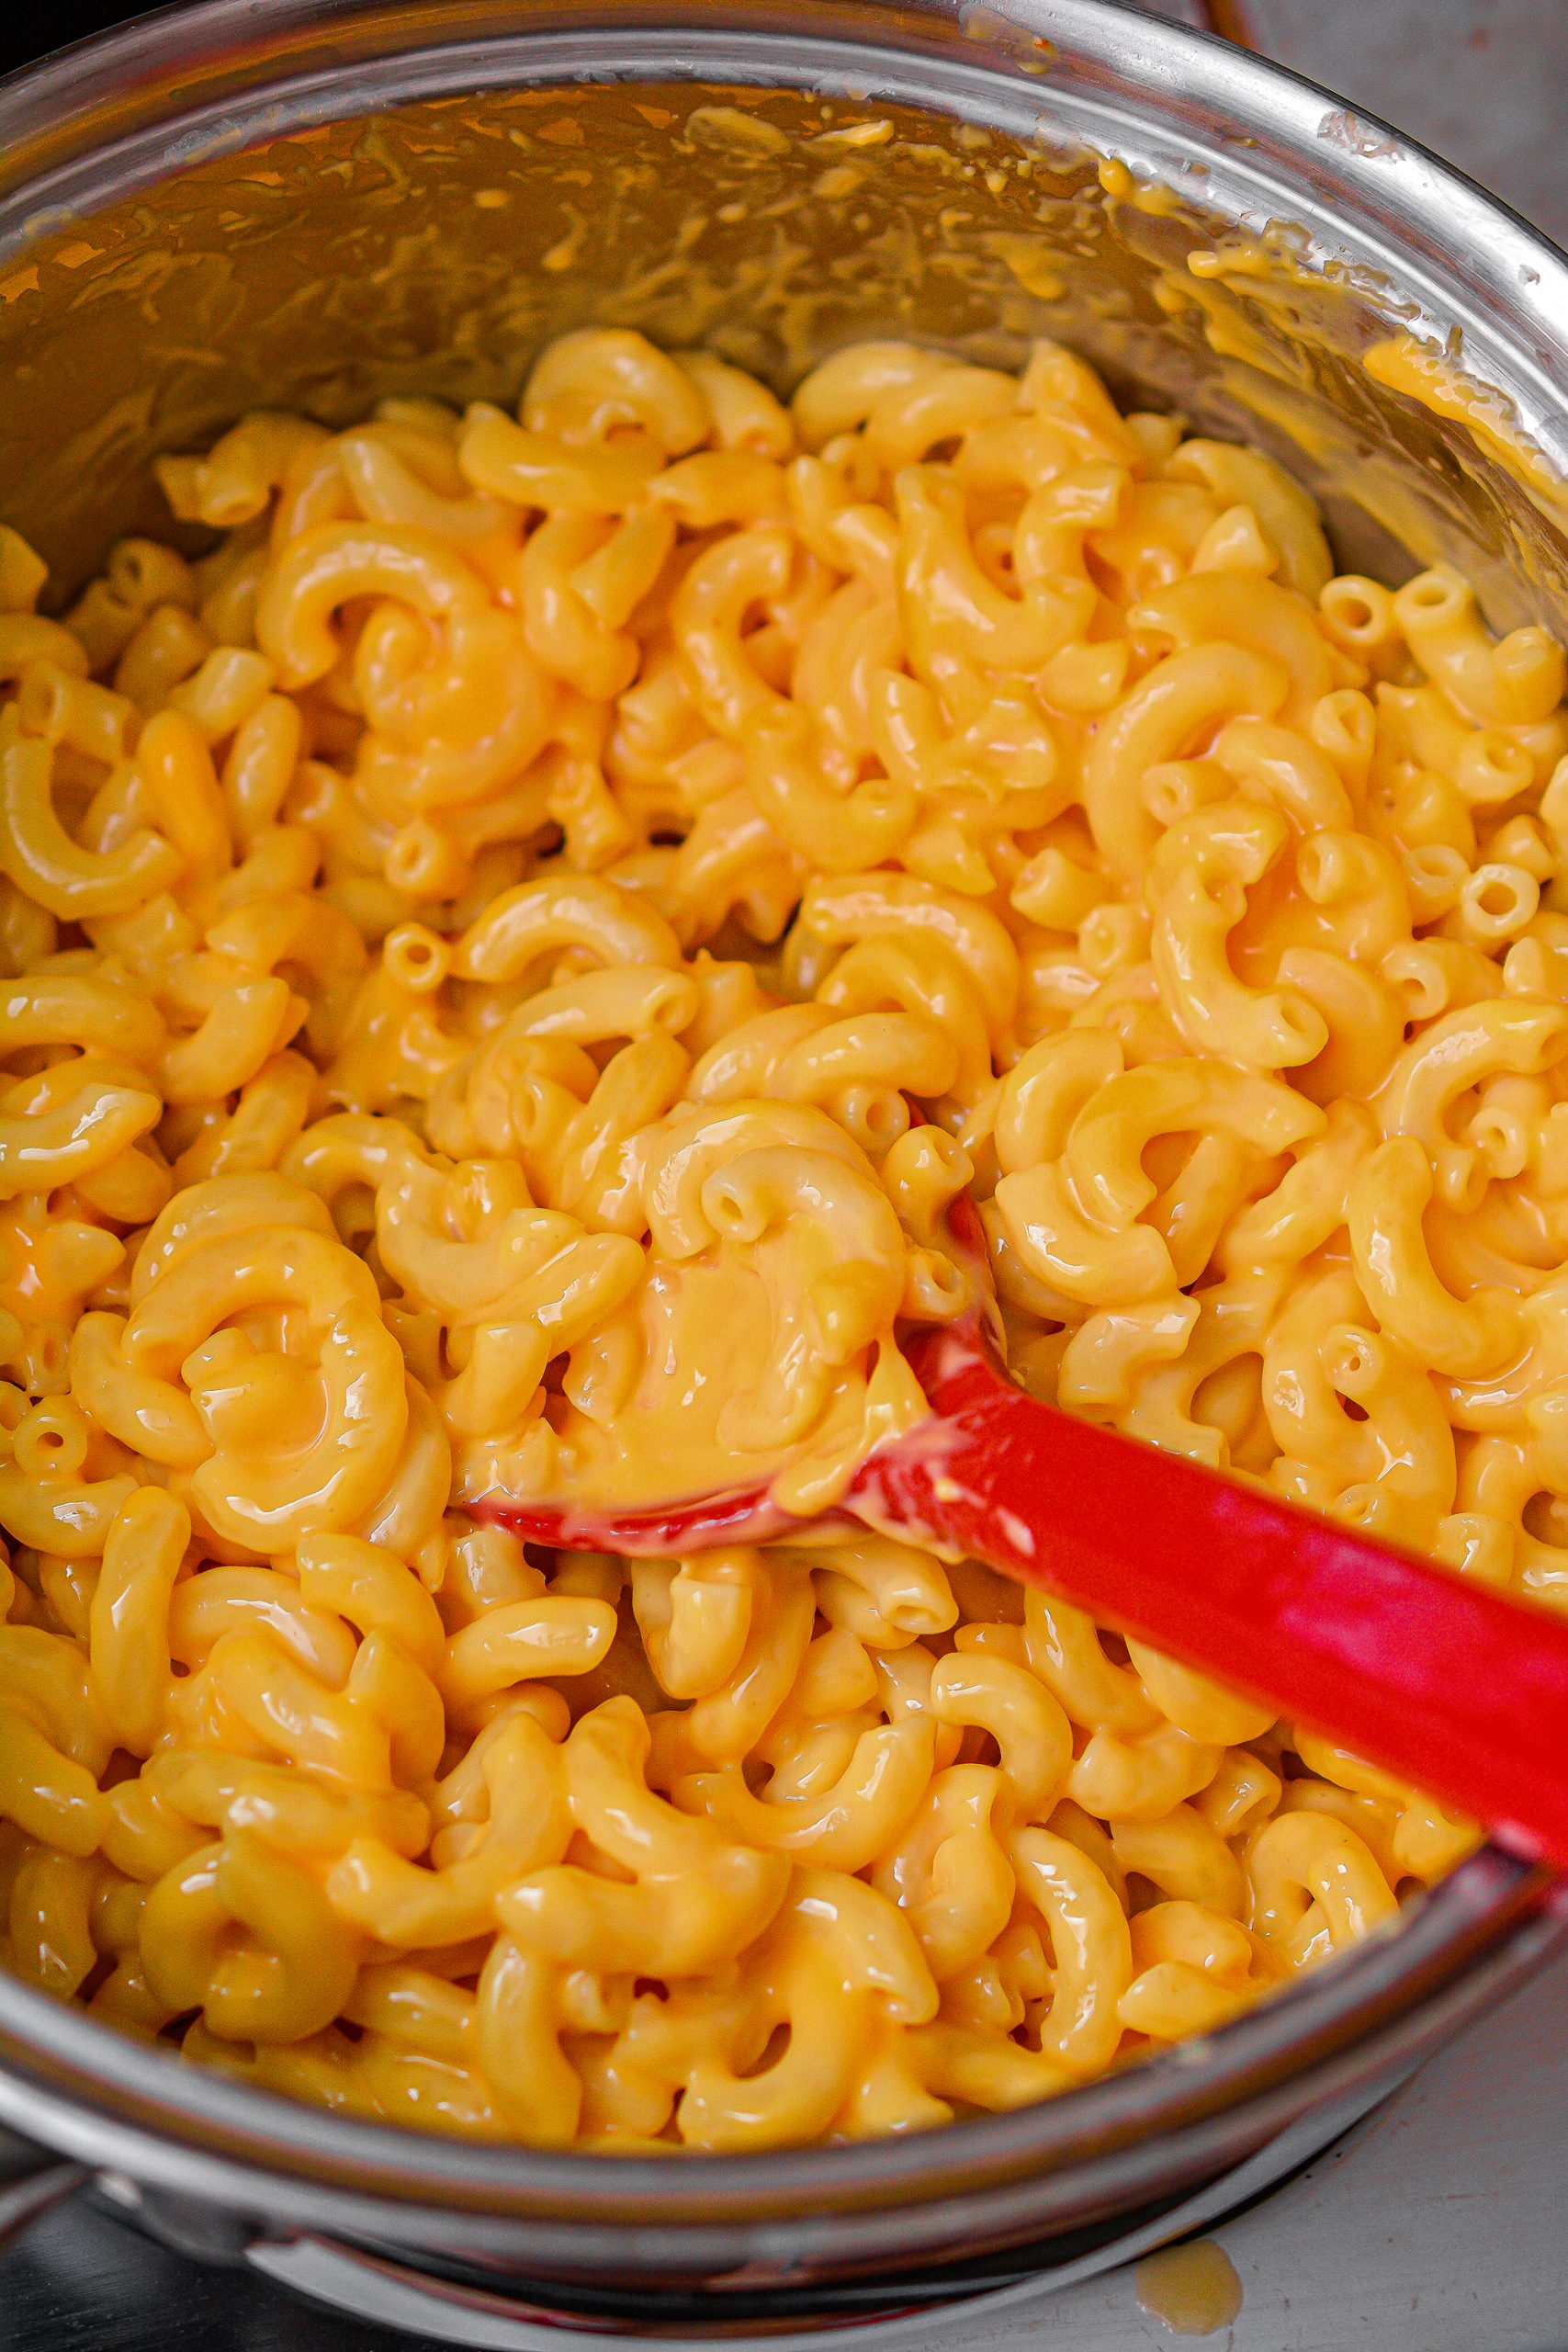 Add the Velveeta cheese to the pot with the macaroni, and stir until melted and combined. 